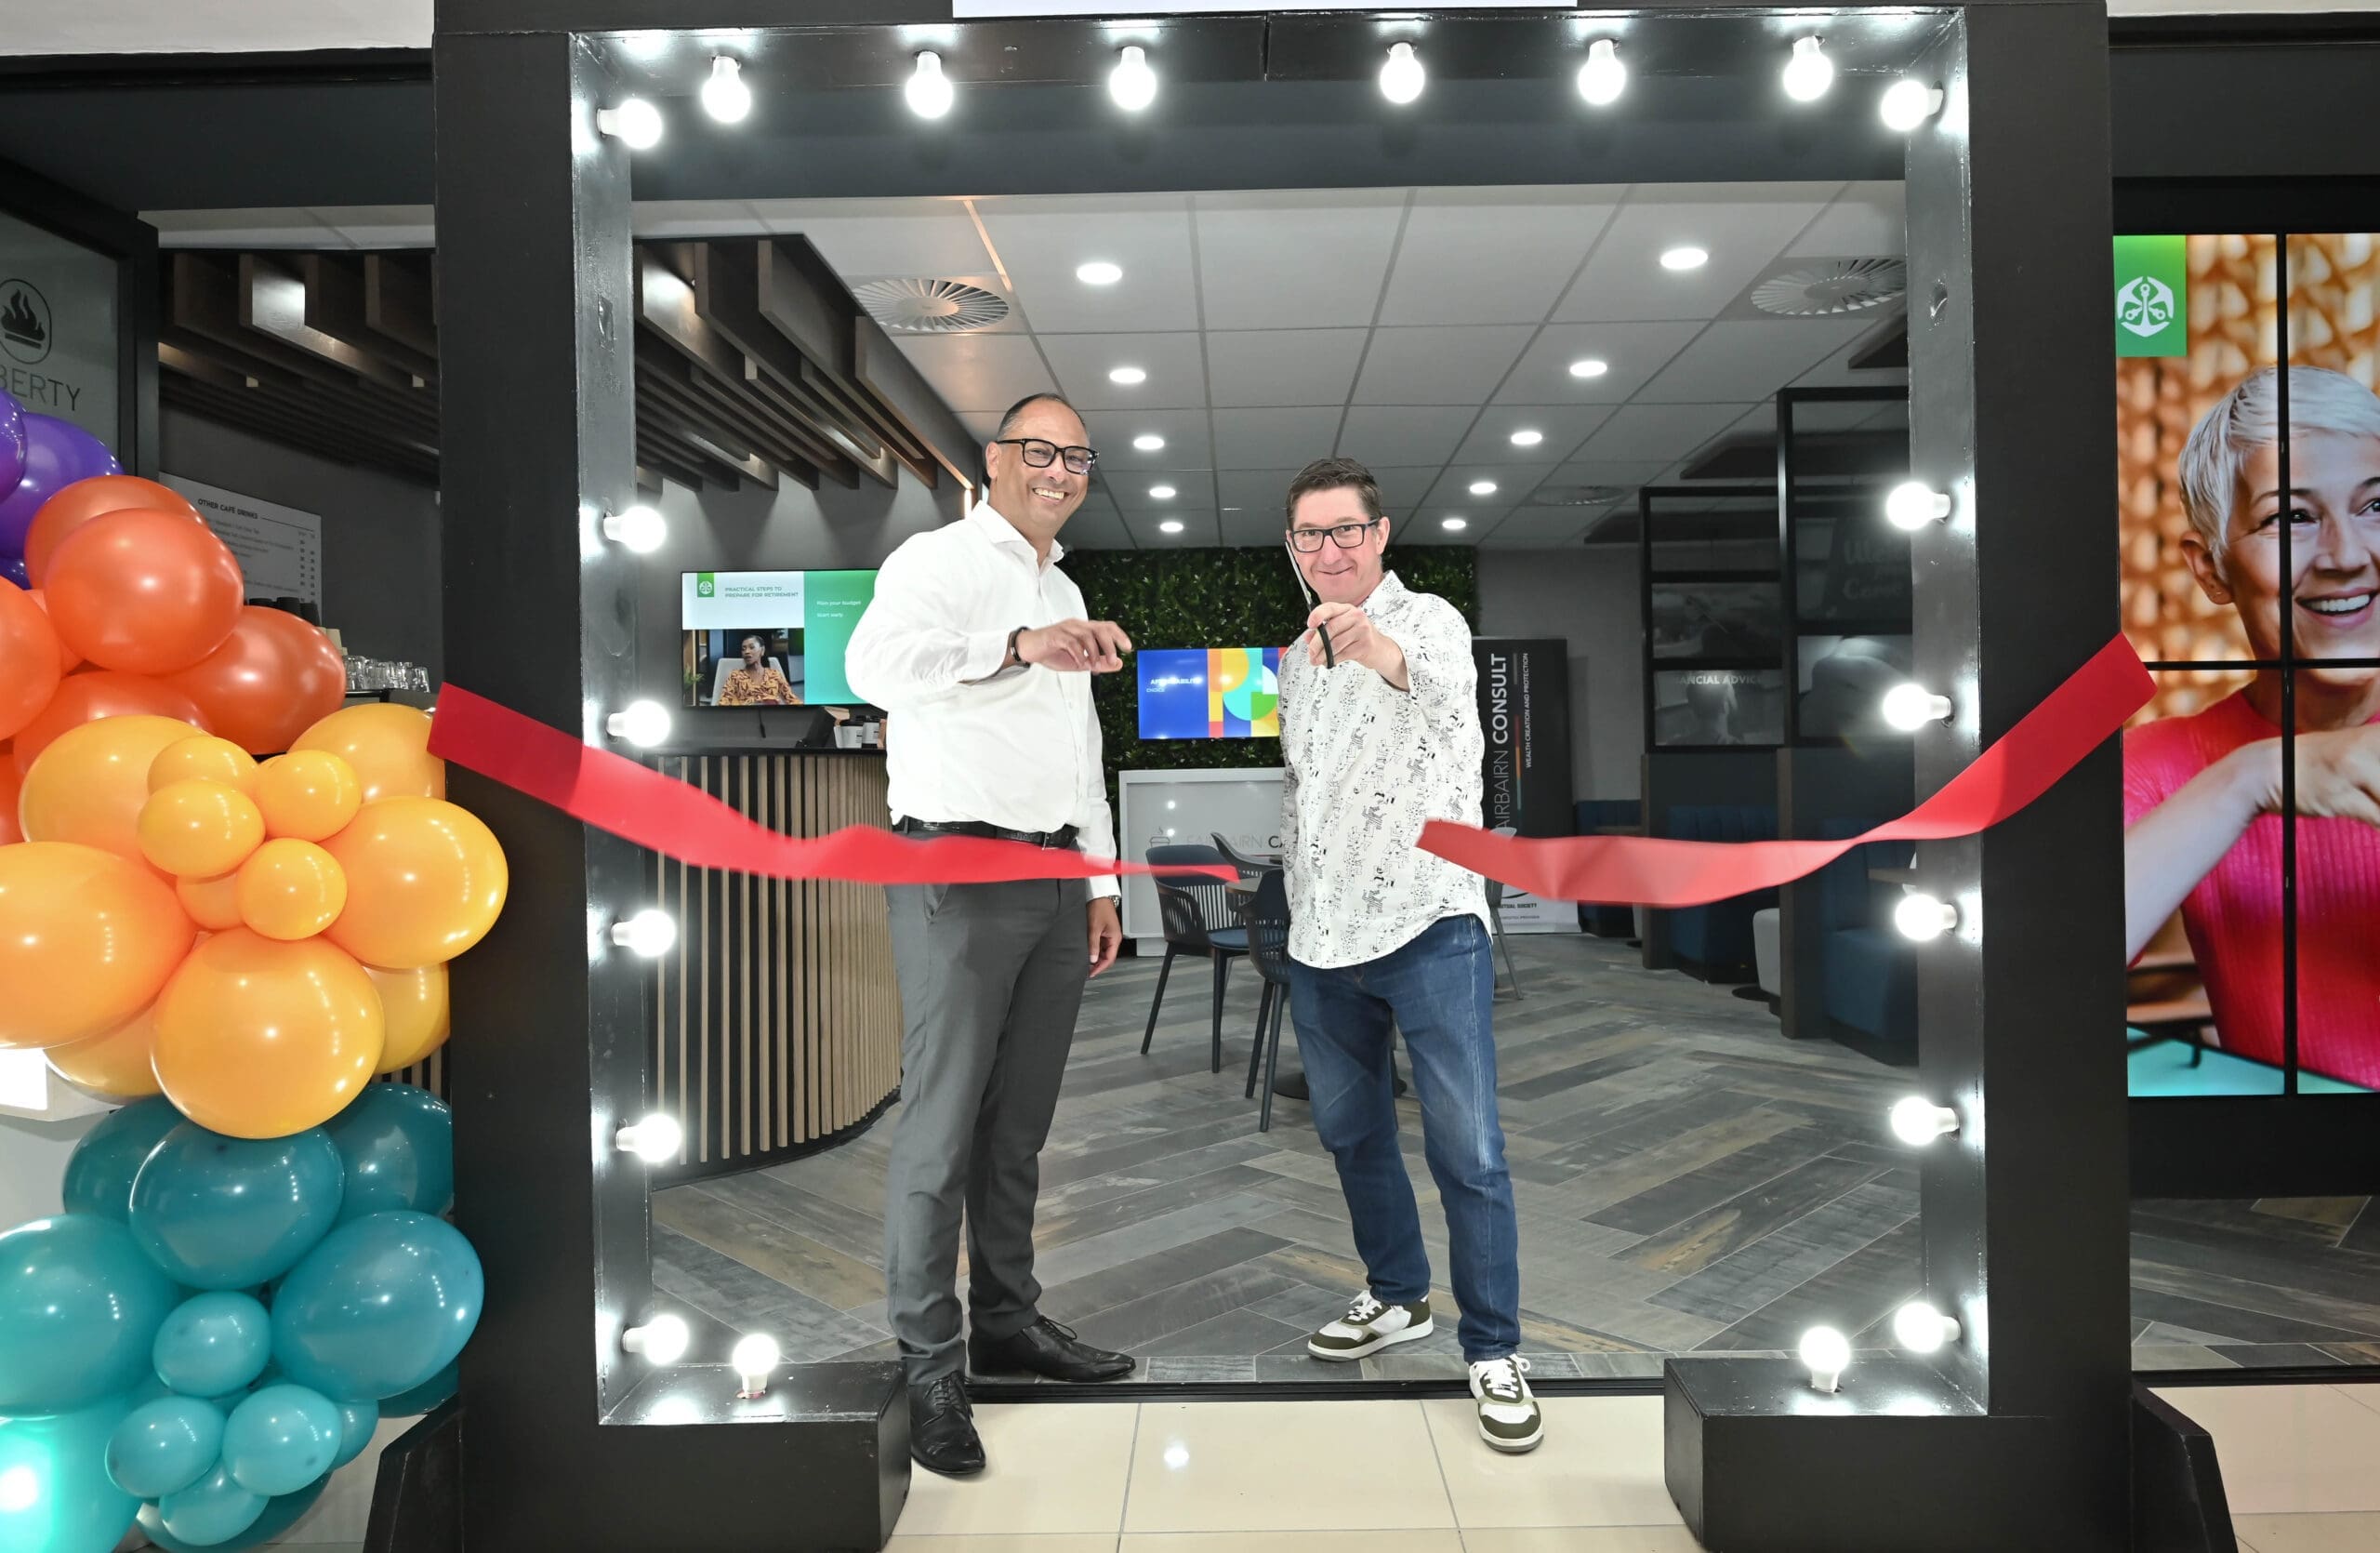 Nassief Mohamed, founder and owner of Fairbairn Café, and Guy Holwill, CEO of Fairbairn Consult, open the second branch of Fairbairn Café in N1 City Mall